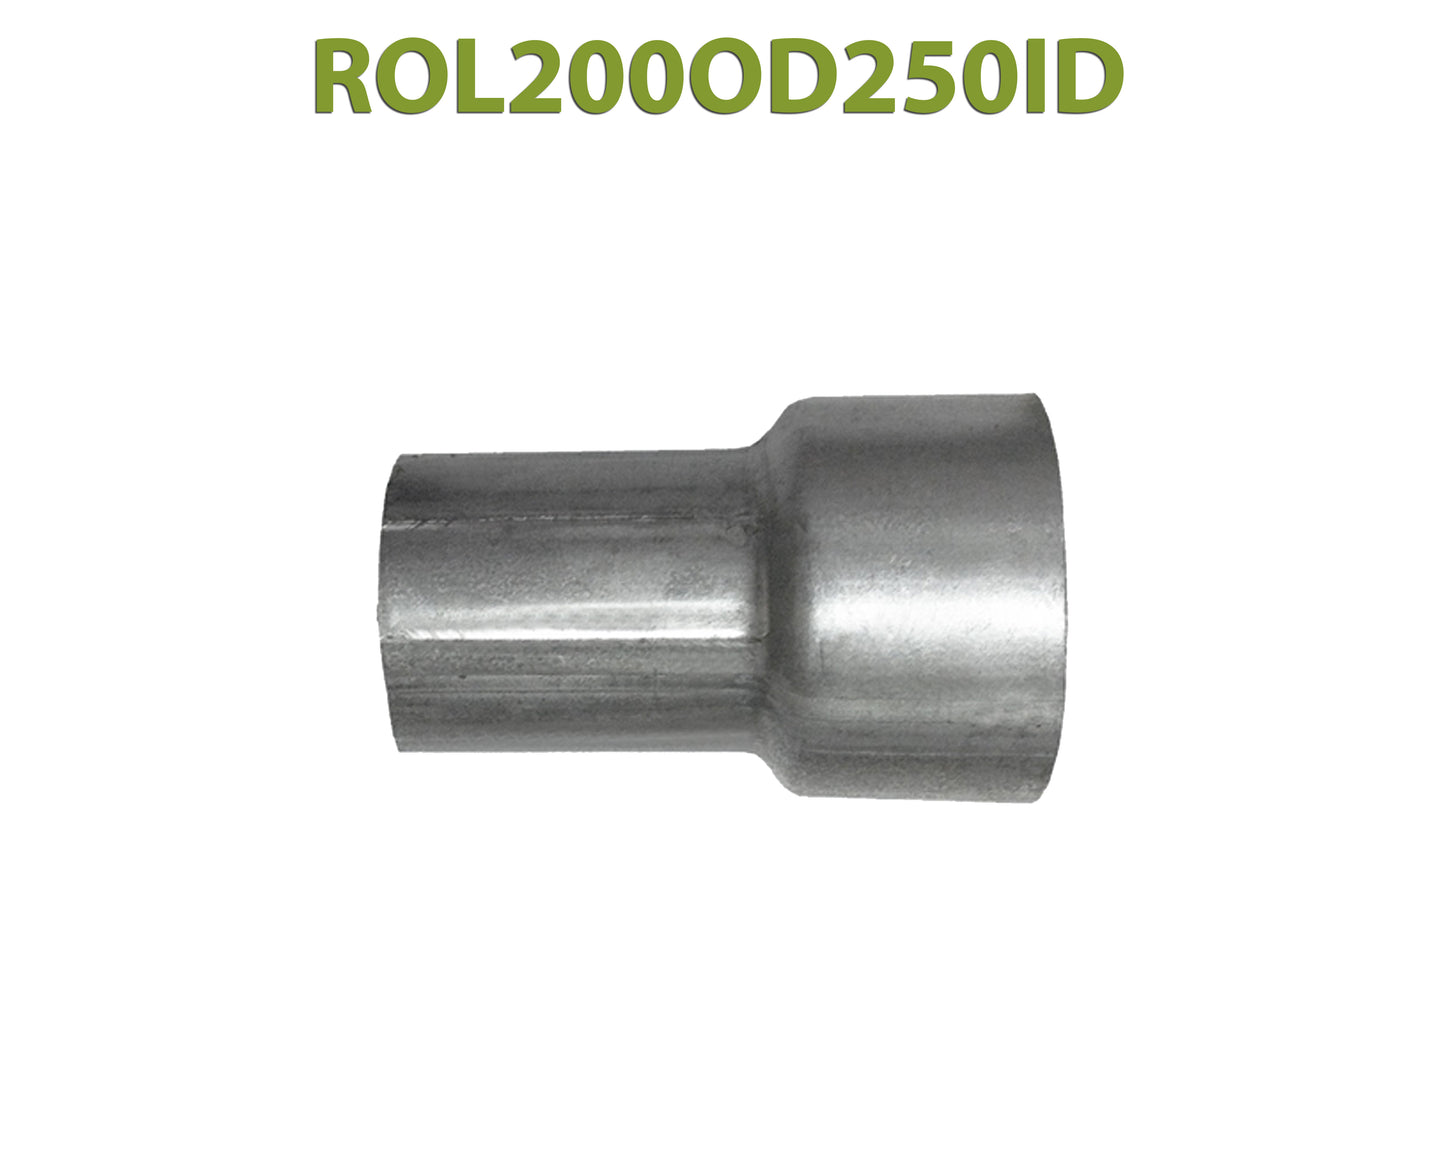 ROL200OD250ID 548505 2” OD to 2 1/2” ID Universal Exhaust Component to Pipe Adapter Reducer